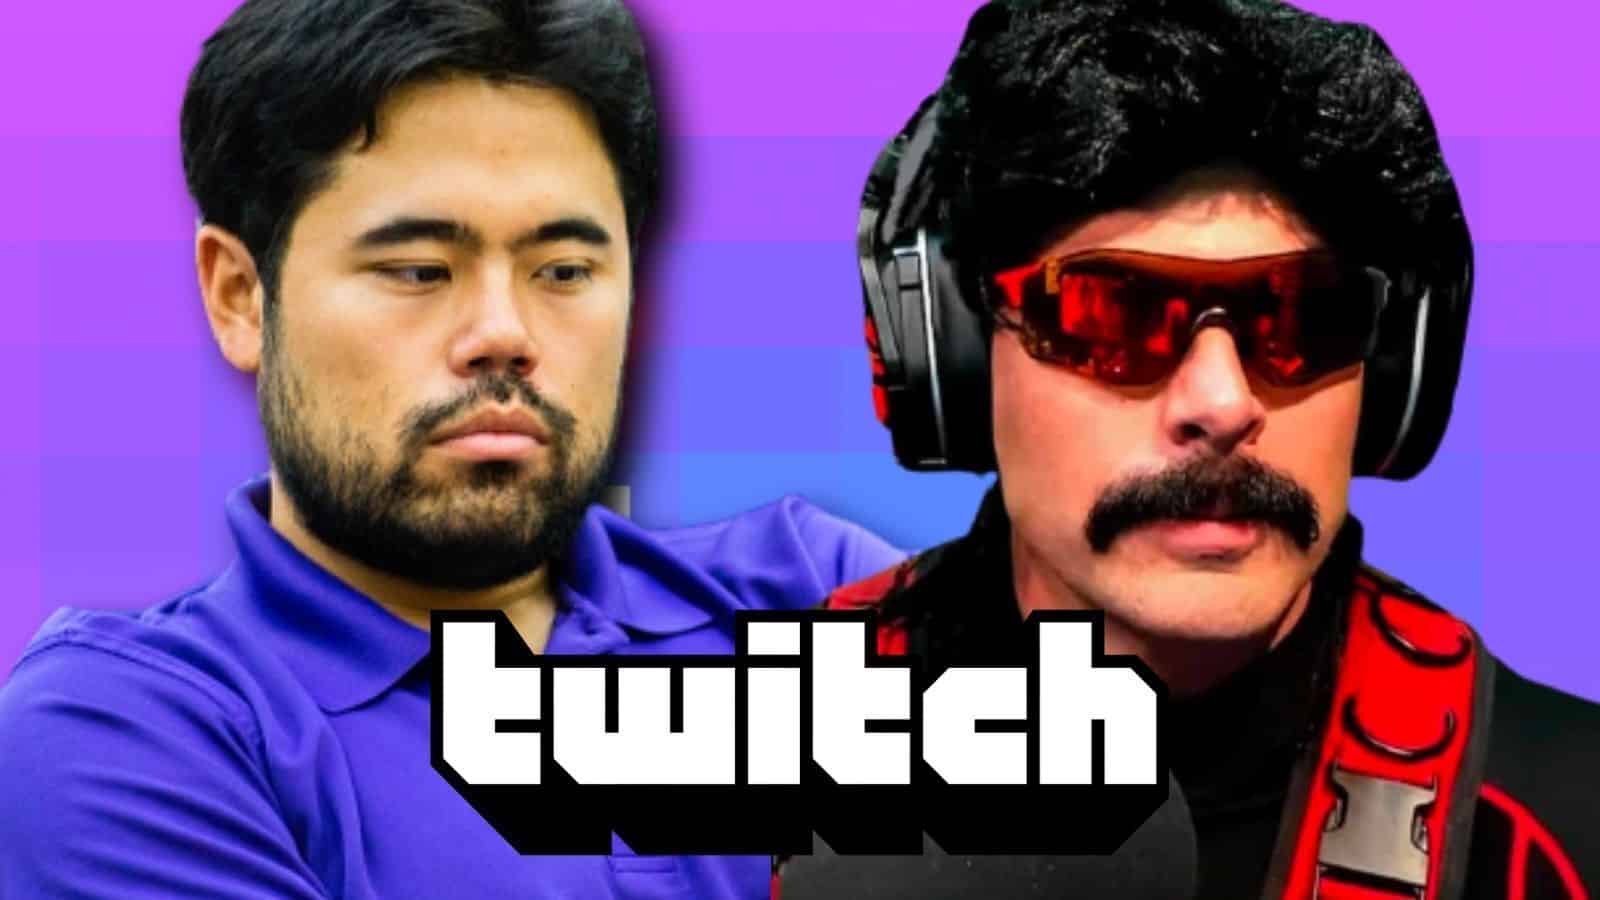 GMHikaru watches Dr DisRespect and DrLupo's chess match